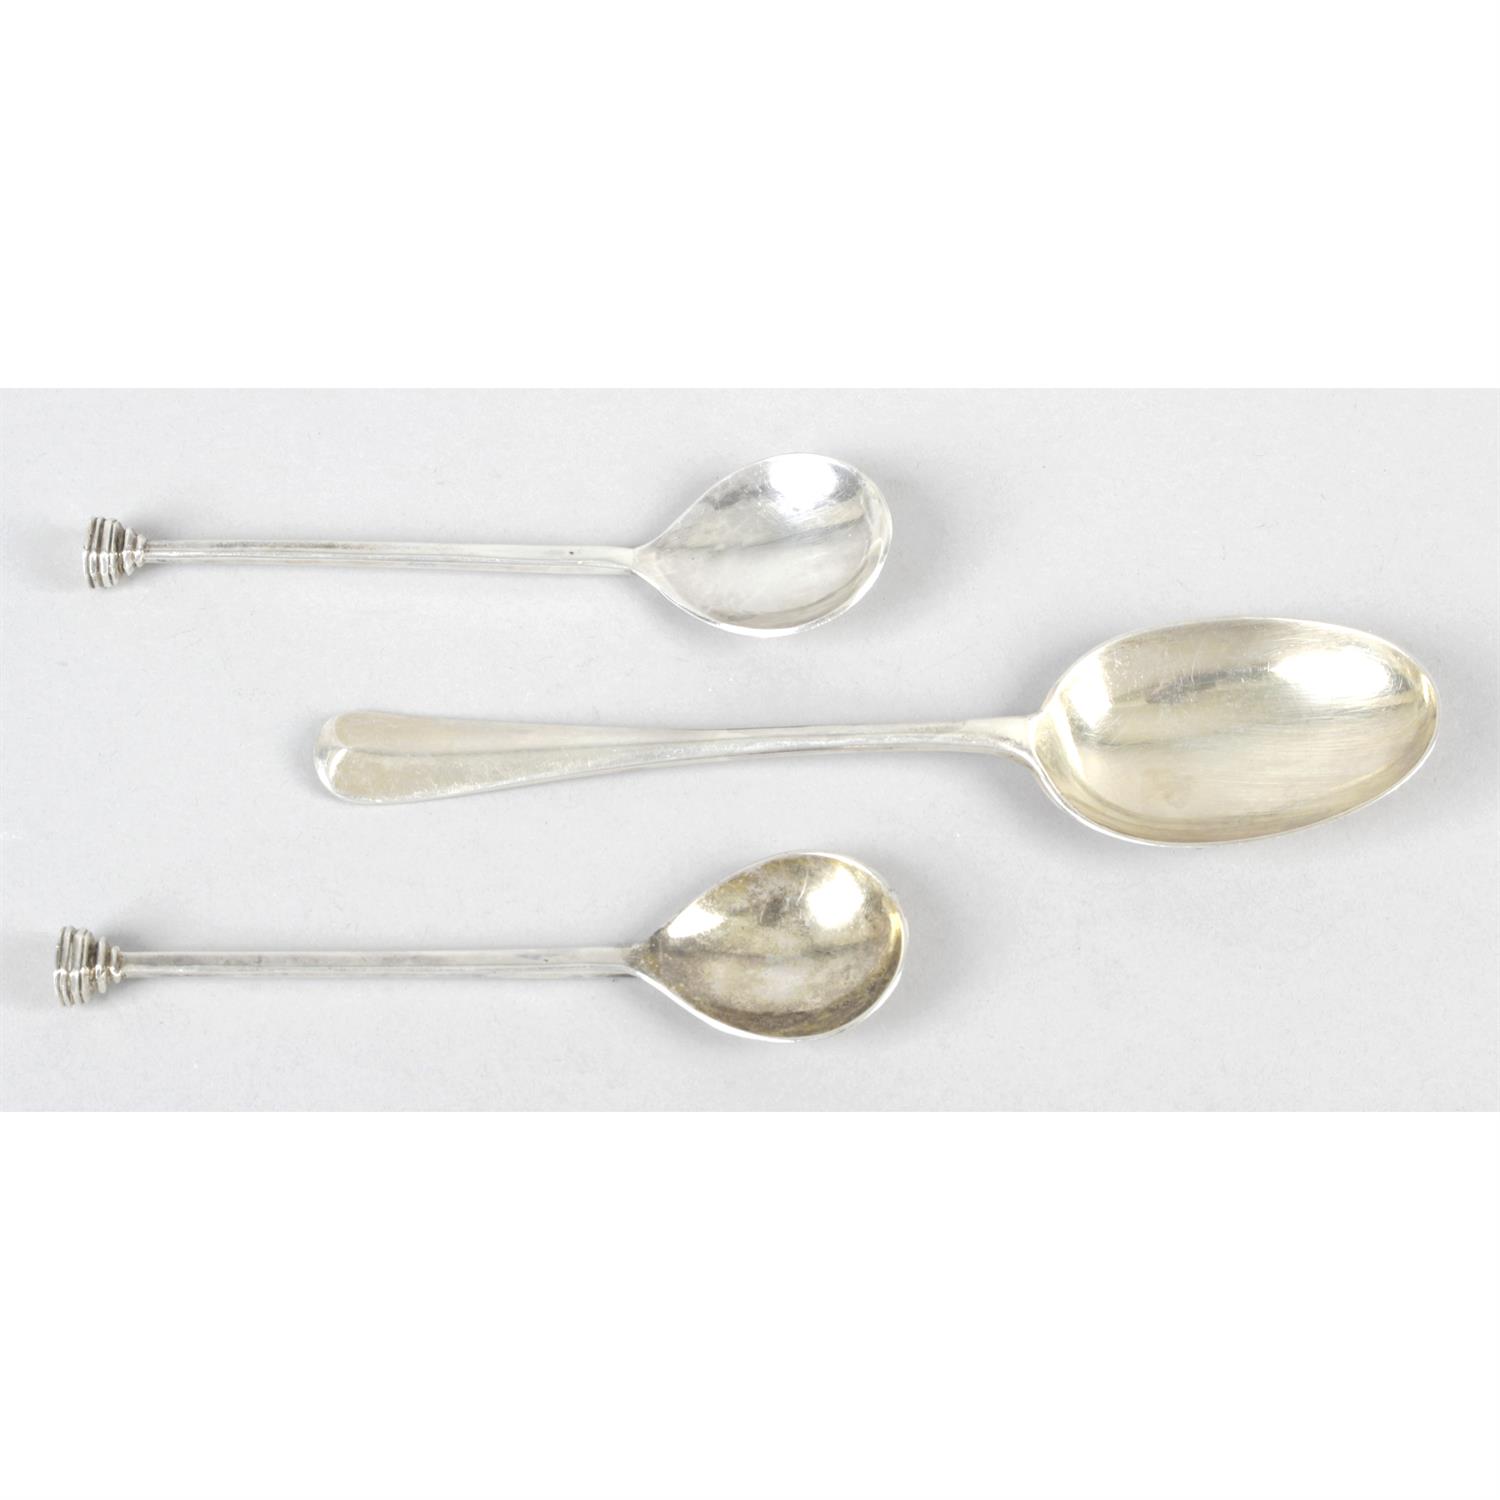 A Guild of Handicraft mid-20th century silver Hanoverian and rat-tail table spoon & two seal-top